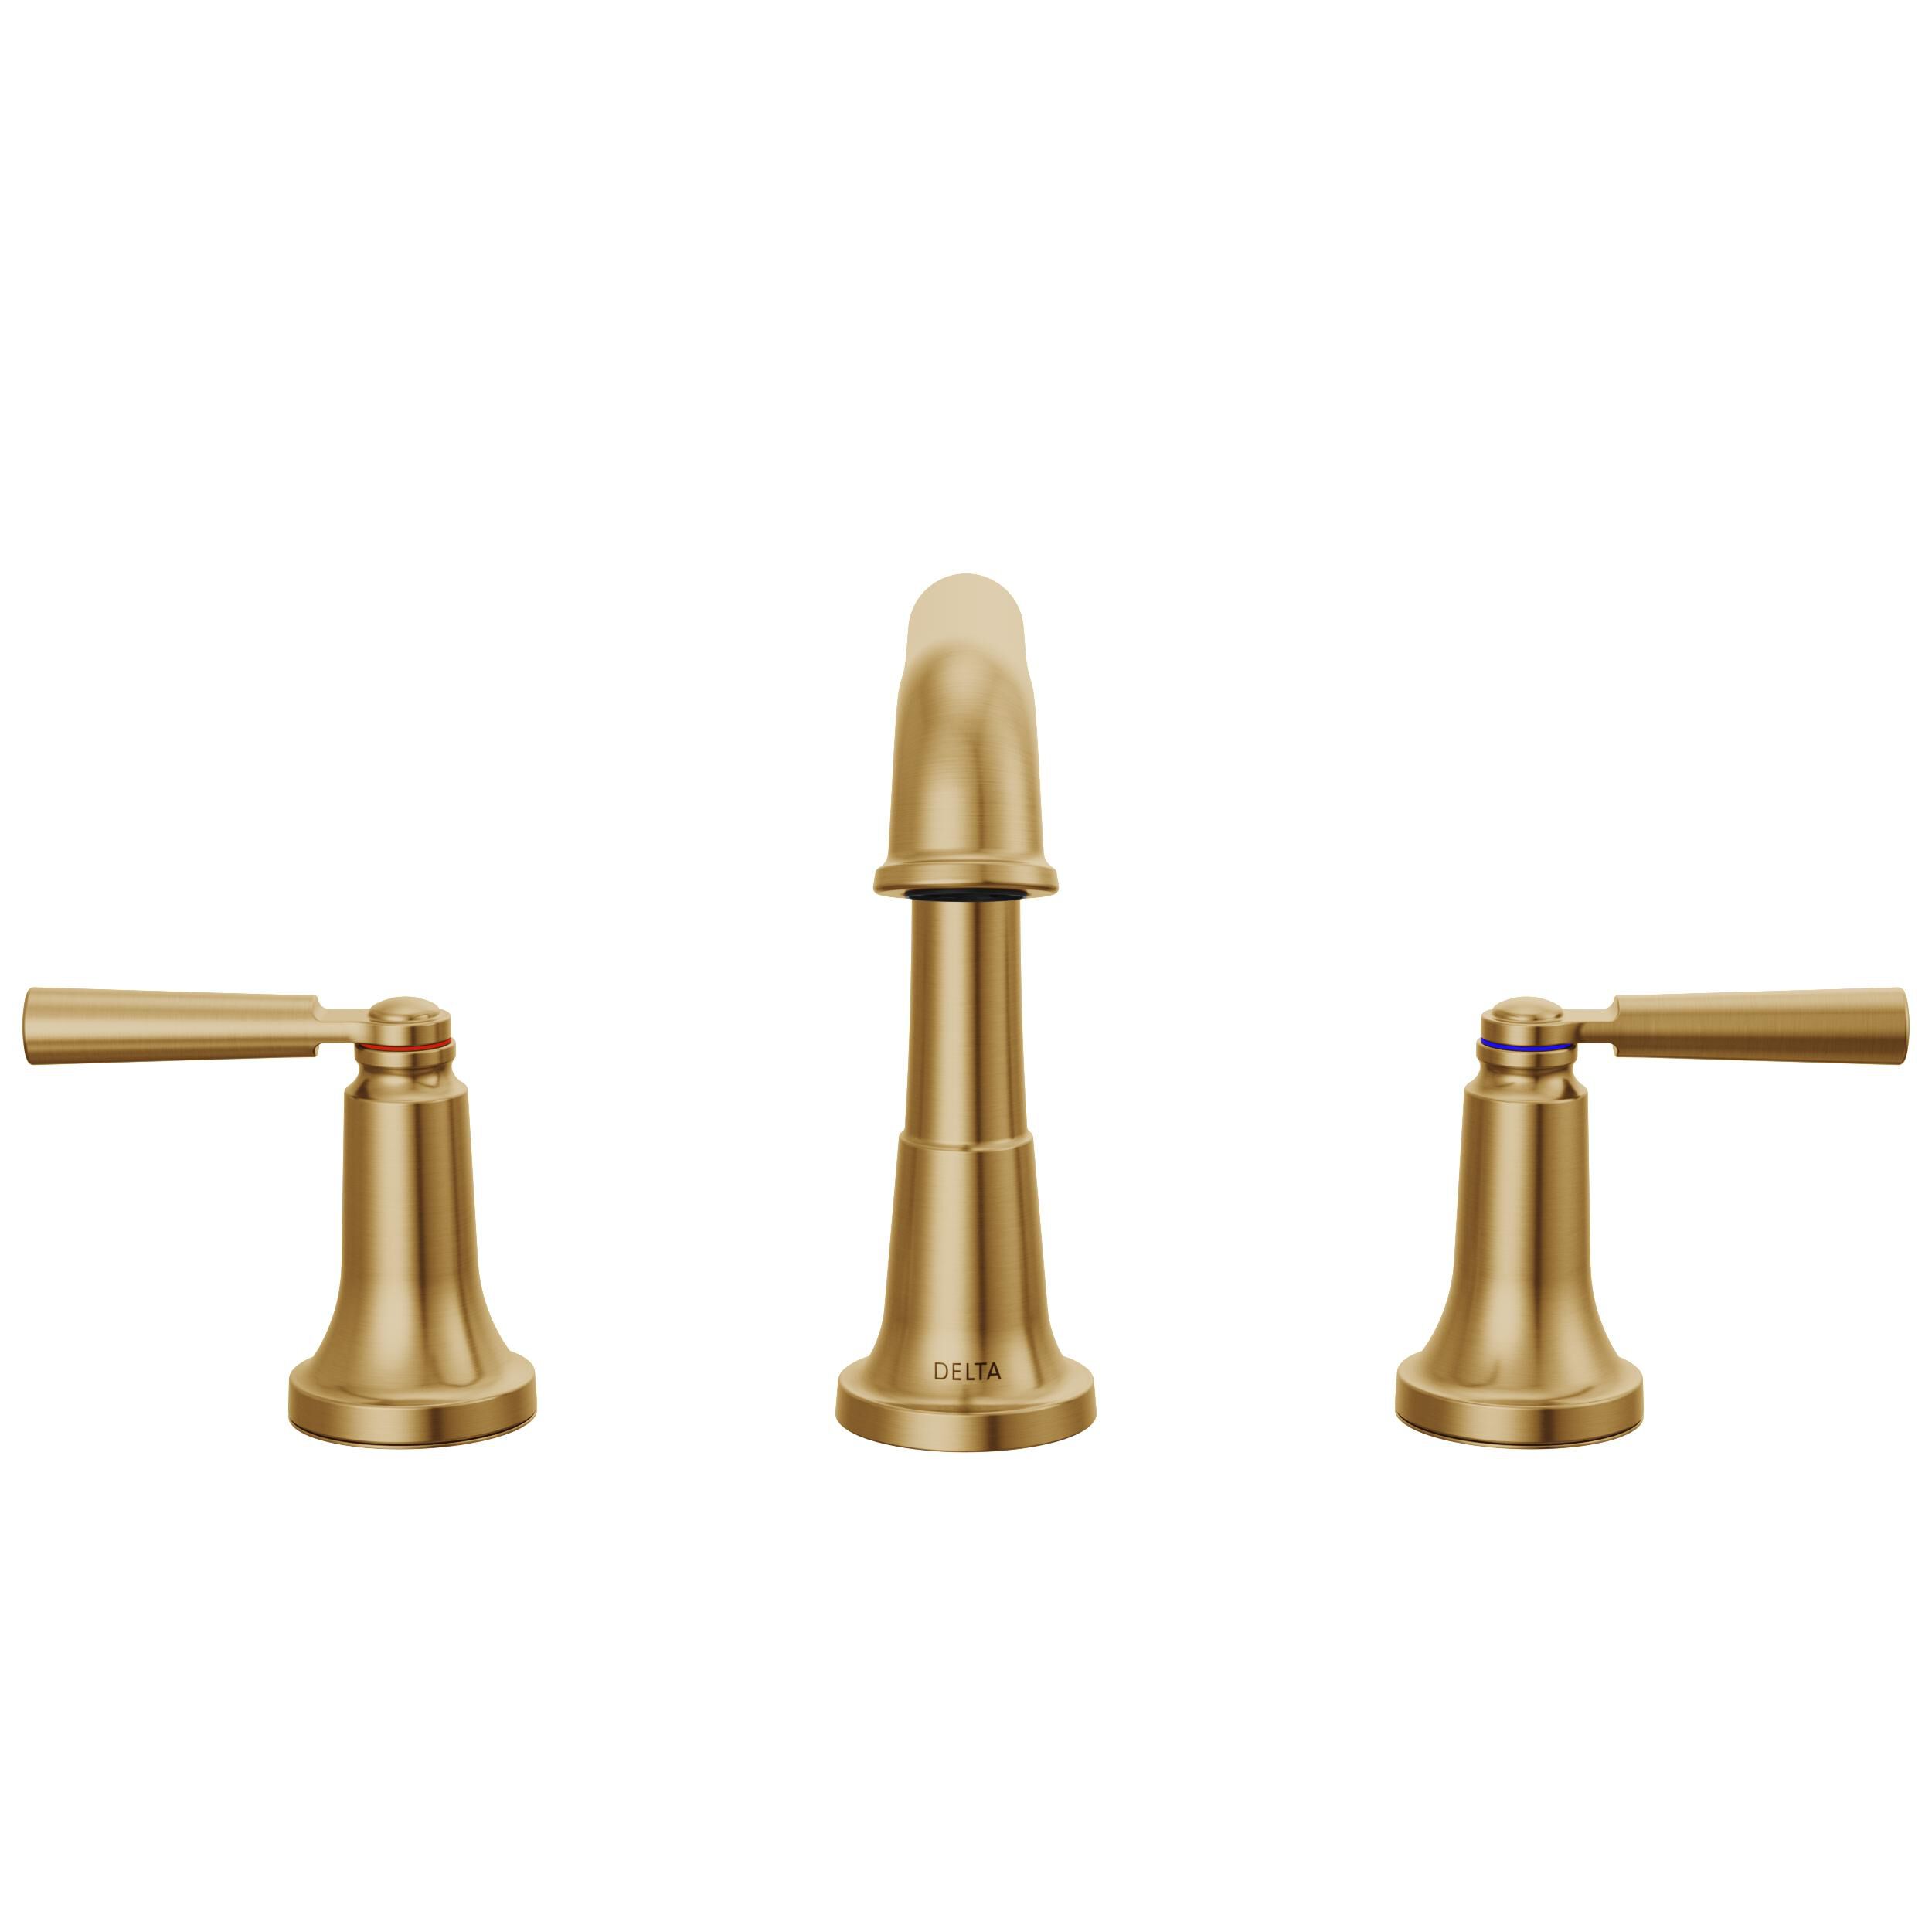 Two Handle Widespread Bathroom Faucet in Champagne Bronze 3536 